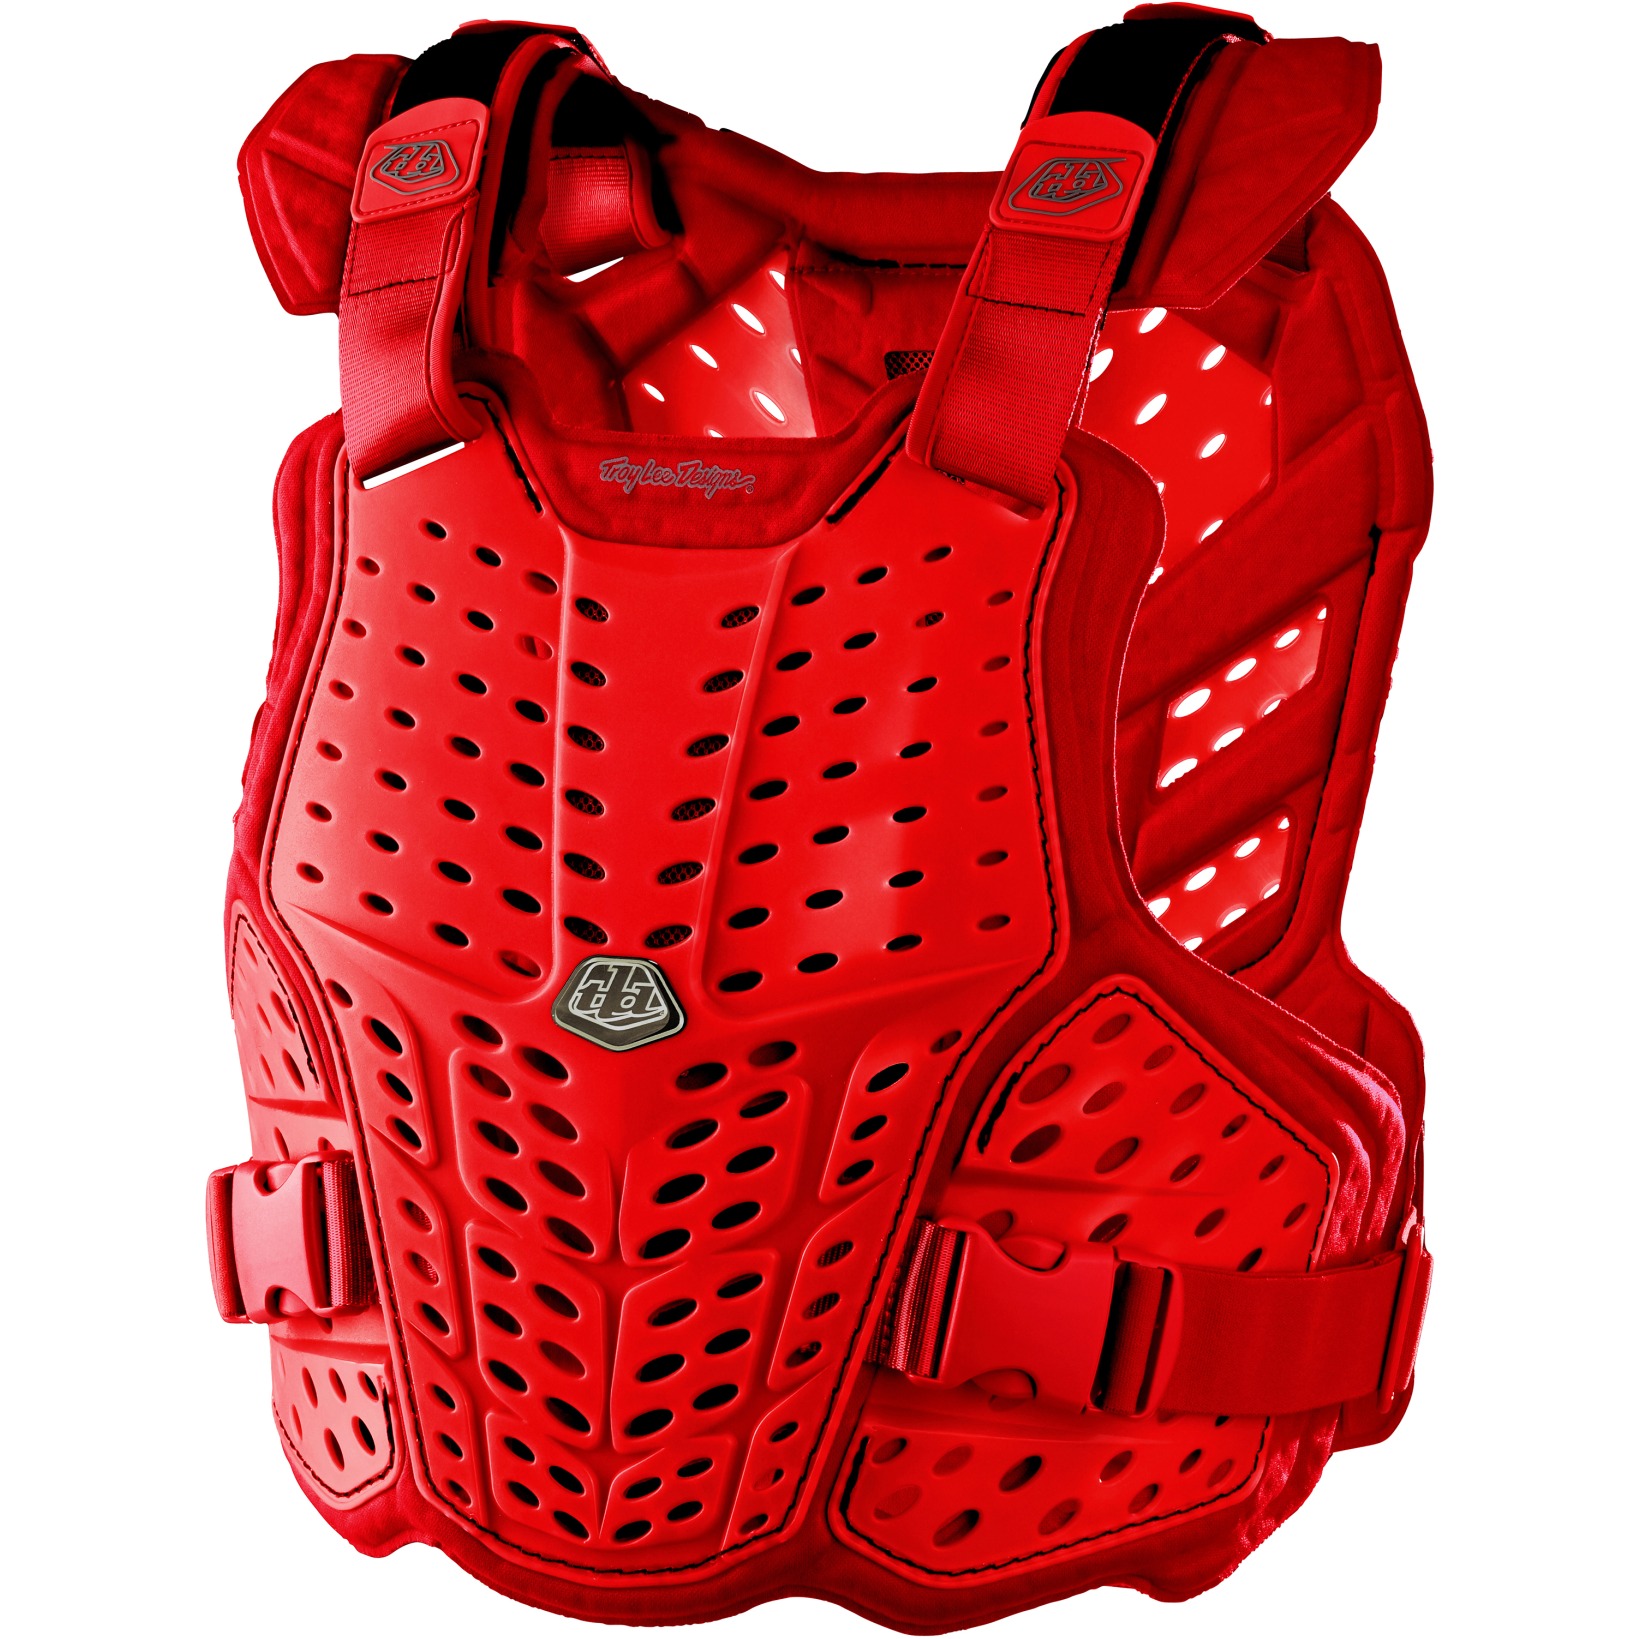 Productfoto van Troy Lee Designs Rockfight Chest Protector - red